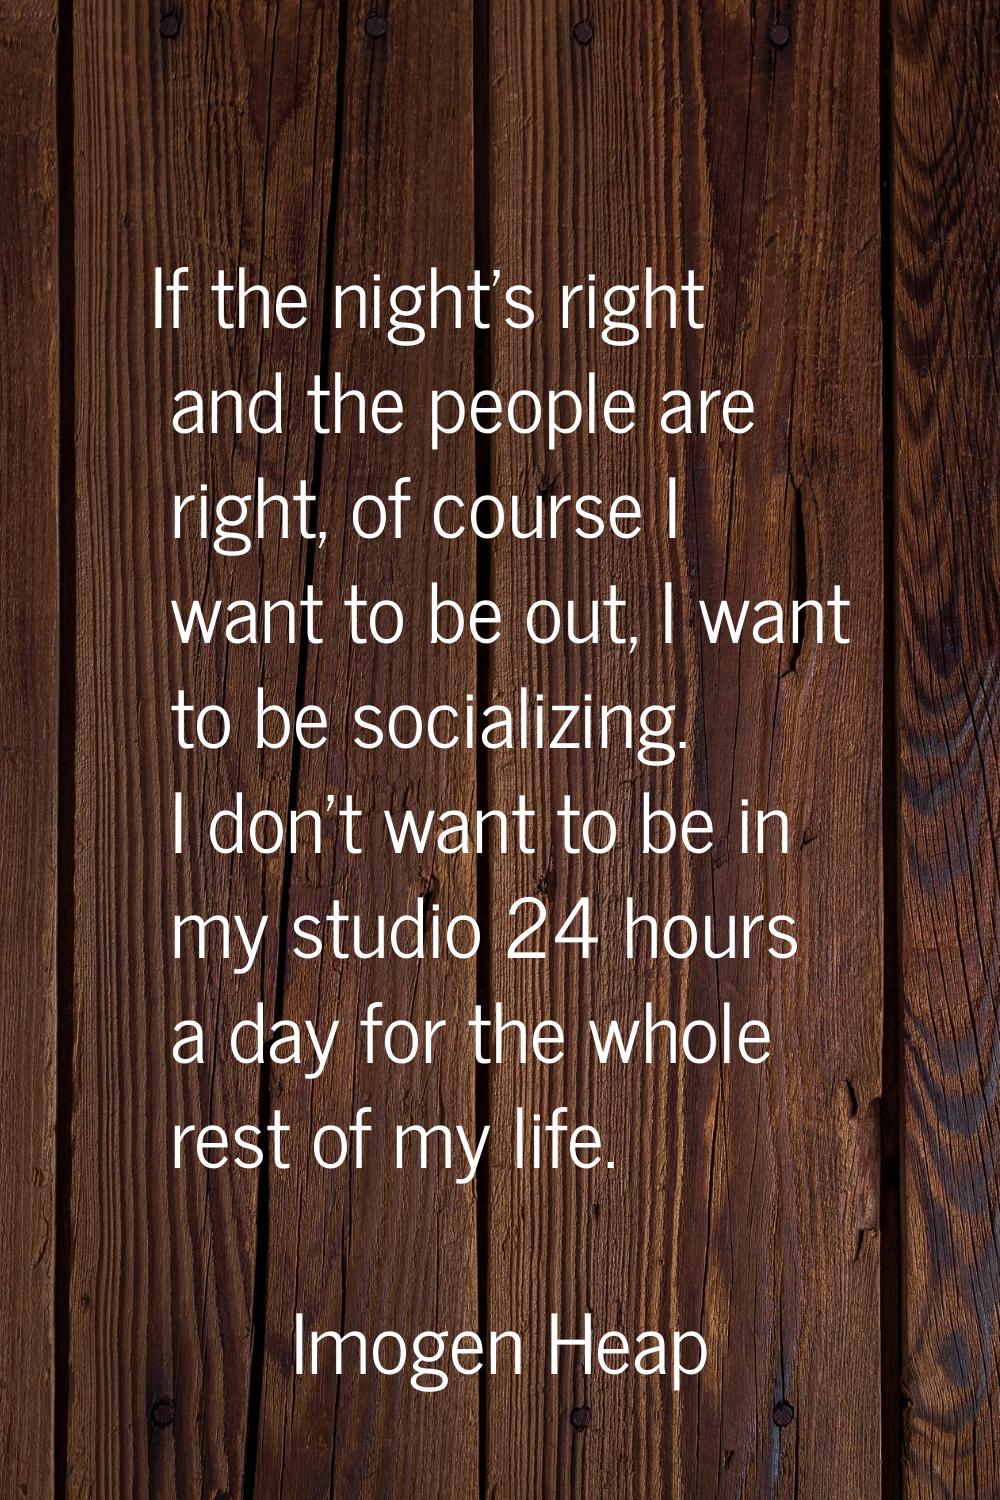 If the night's right and the people are right, of course I want to be out, I want to be socializing